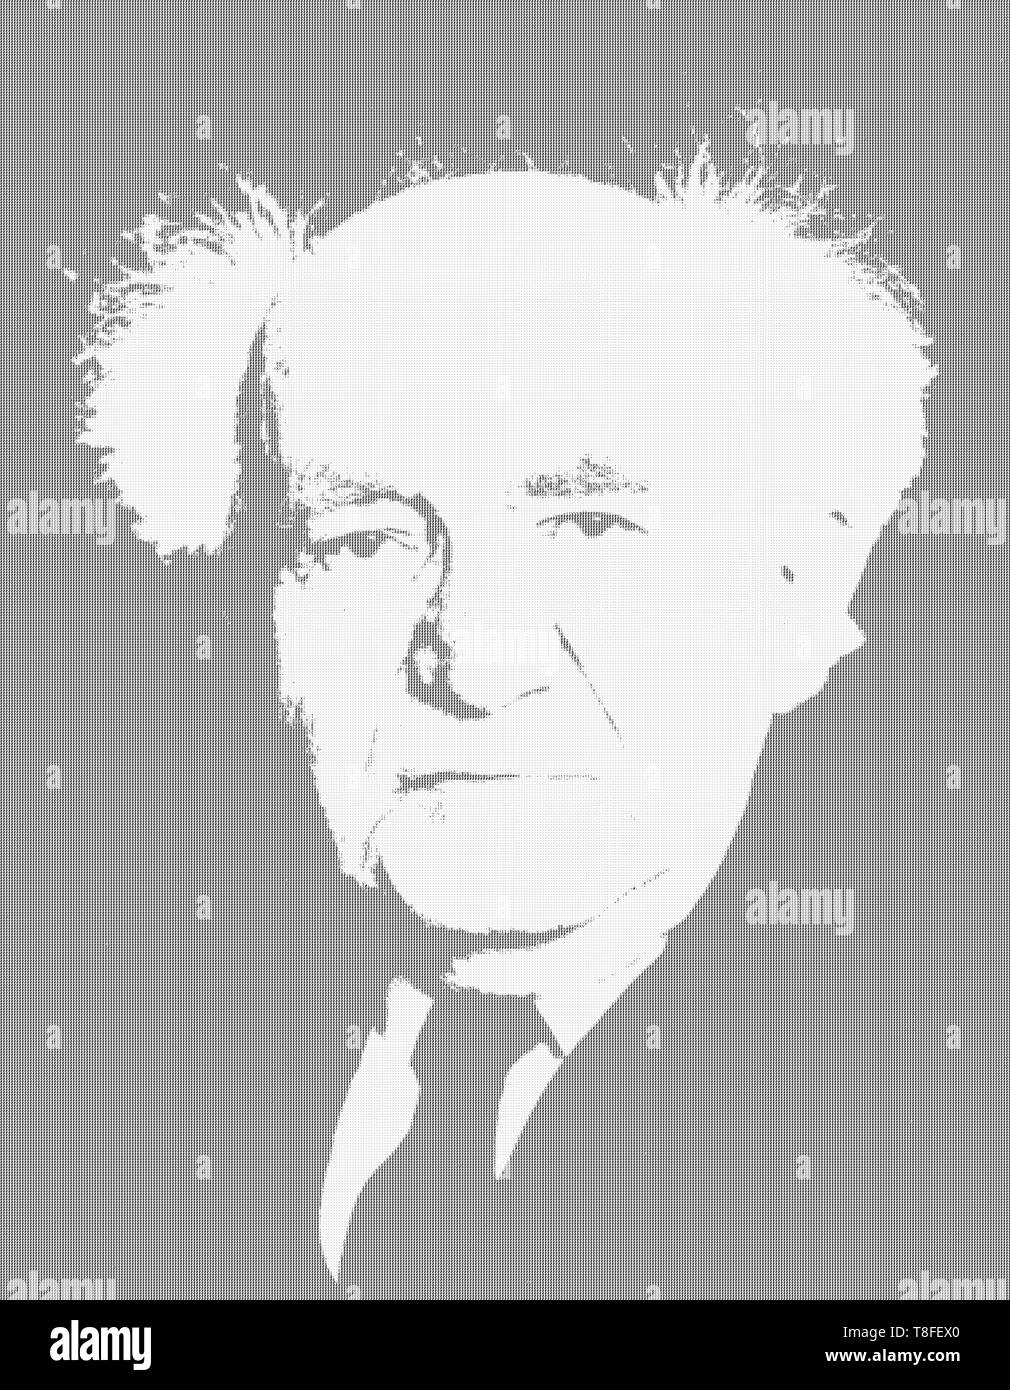 Digitally enhanced image of David Ben-Gurion (born David Grün); 16 October 1886 – 1 December 1973) was the primary national founder of the State of Is Stock Photo